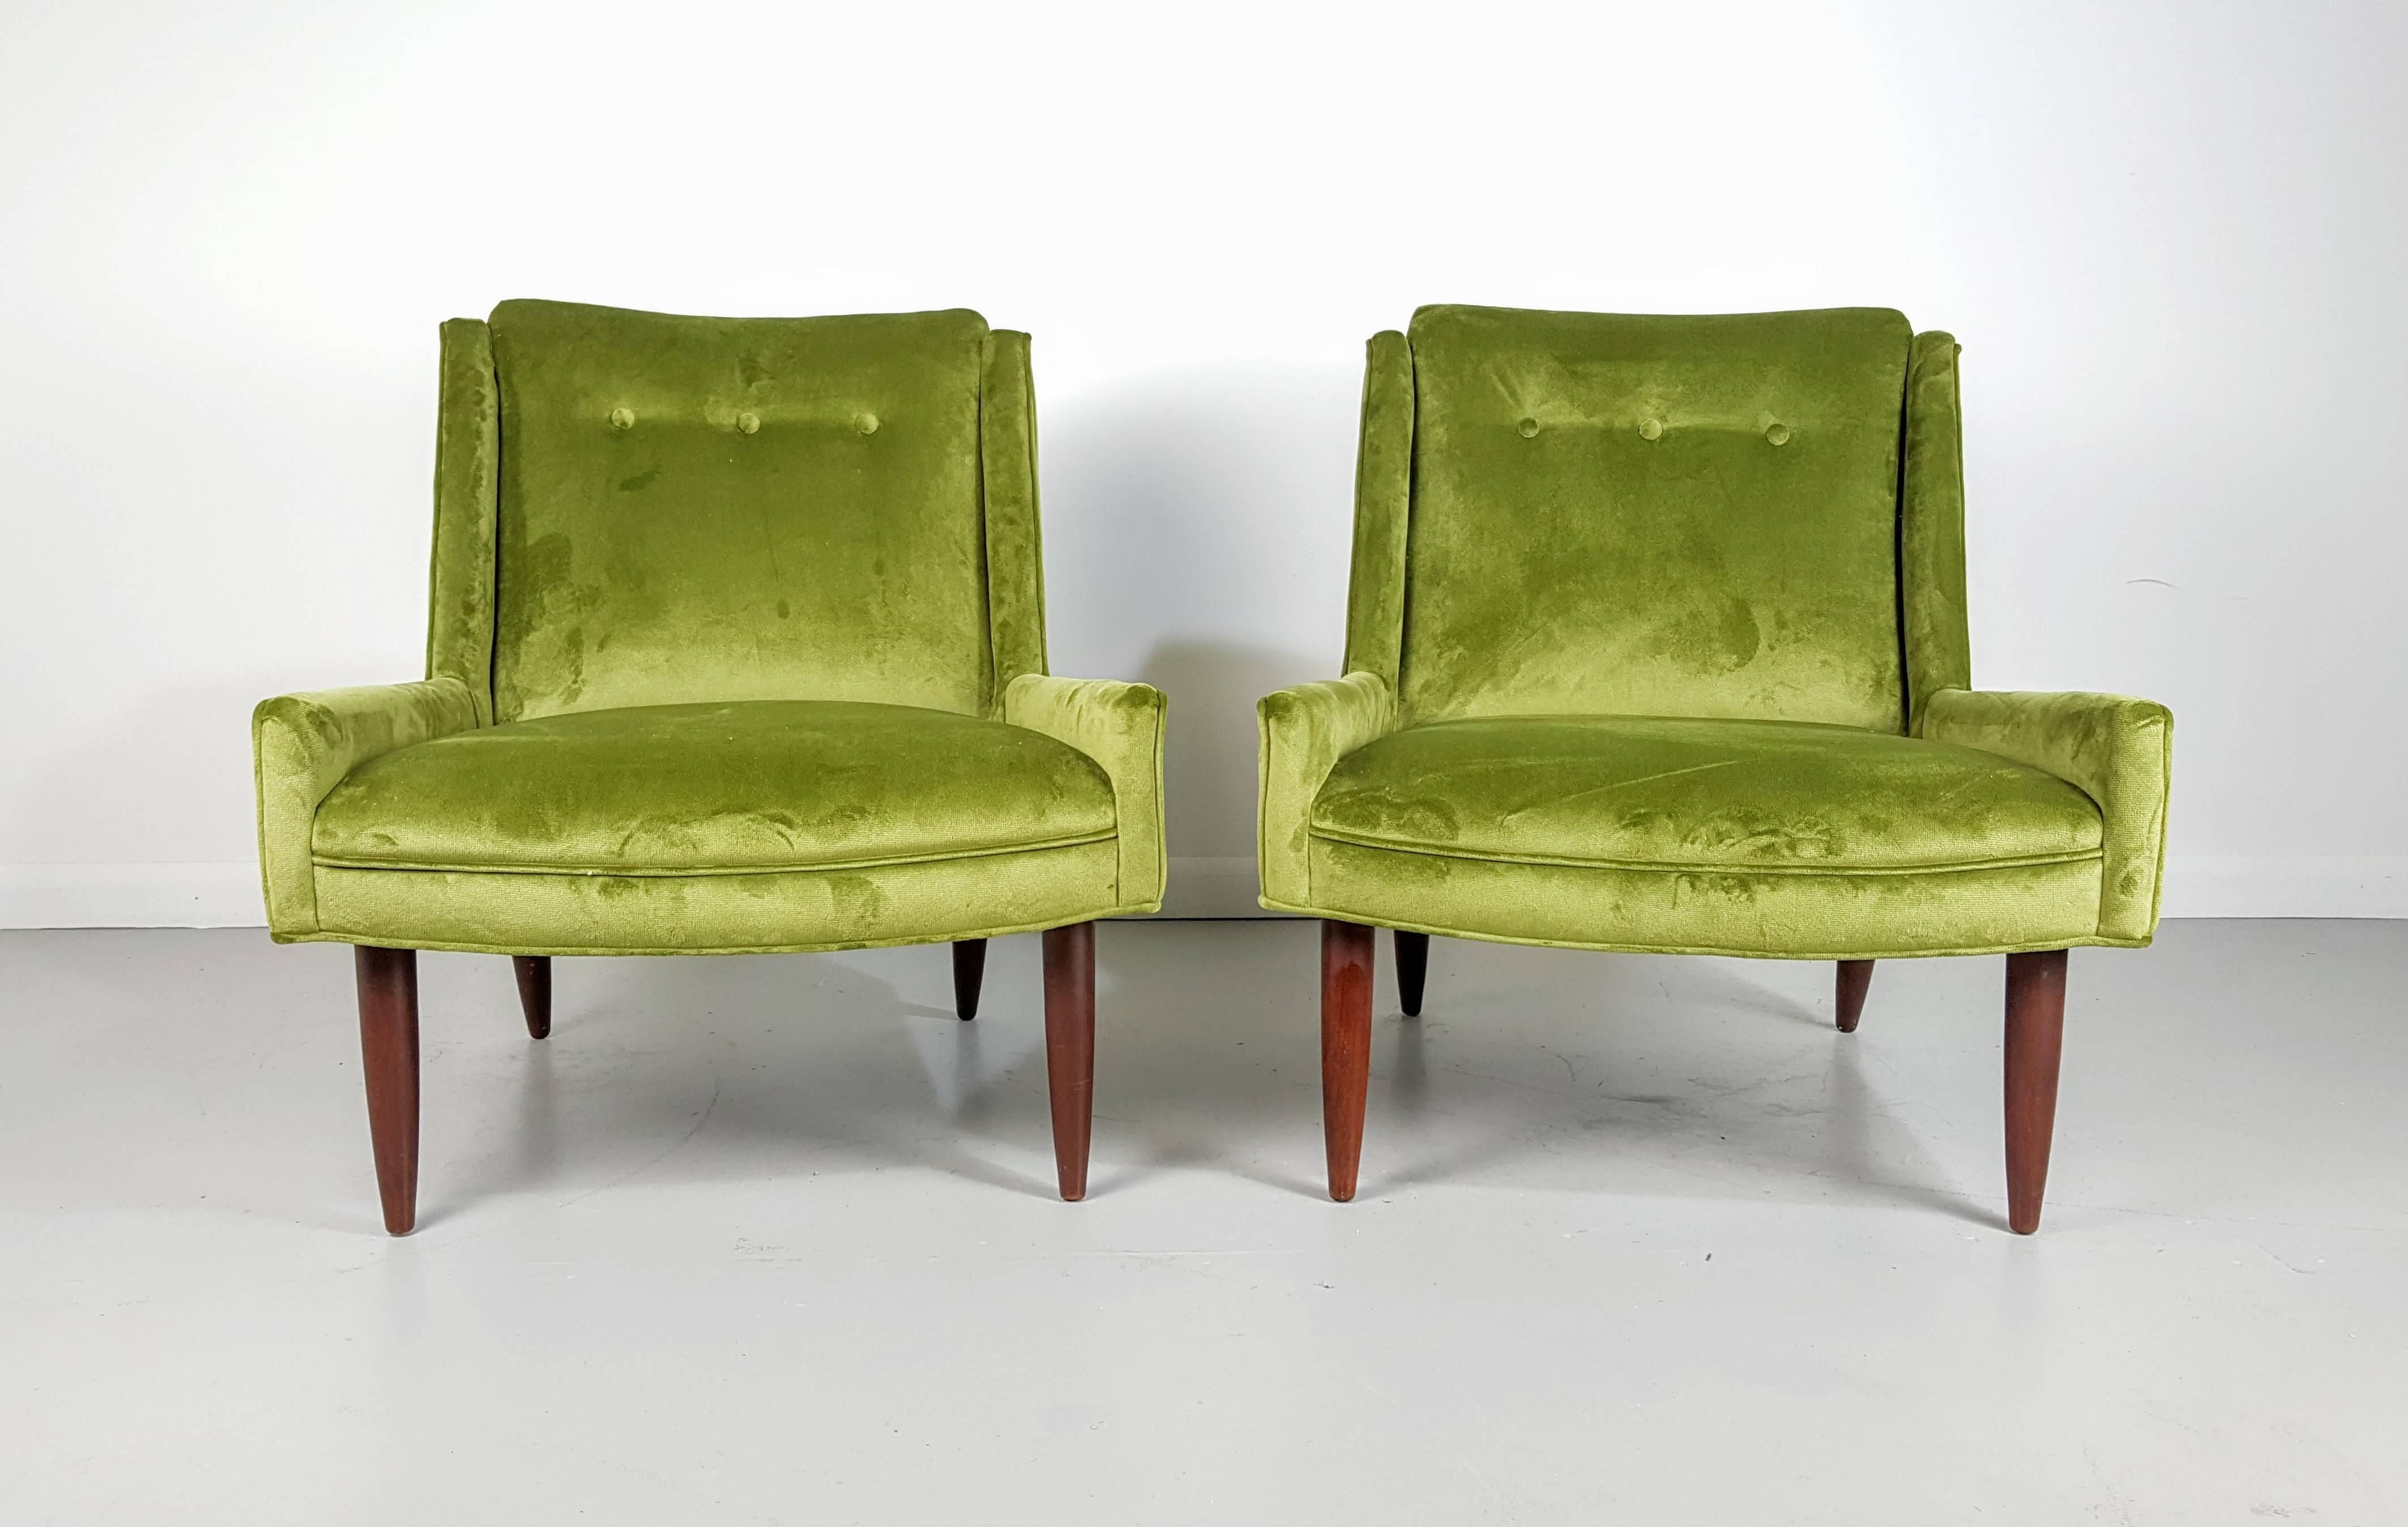 Handsome slipper chairs in the manner of Harvey Probber, 1950s. Very comfortable. Newly refinished in a plush green velvet.

We offer free regular deliveries to NYC and Philadelphia area. Delivery to DC, MD, CT and MA are available if schedule